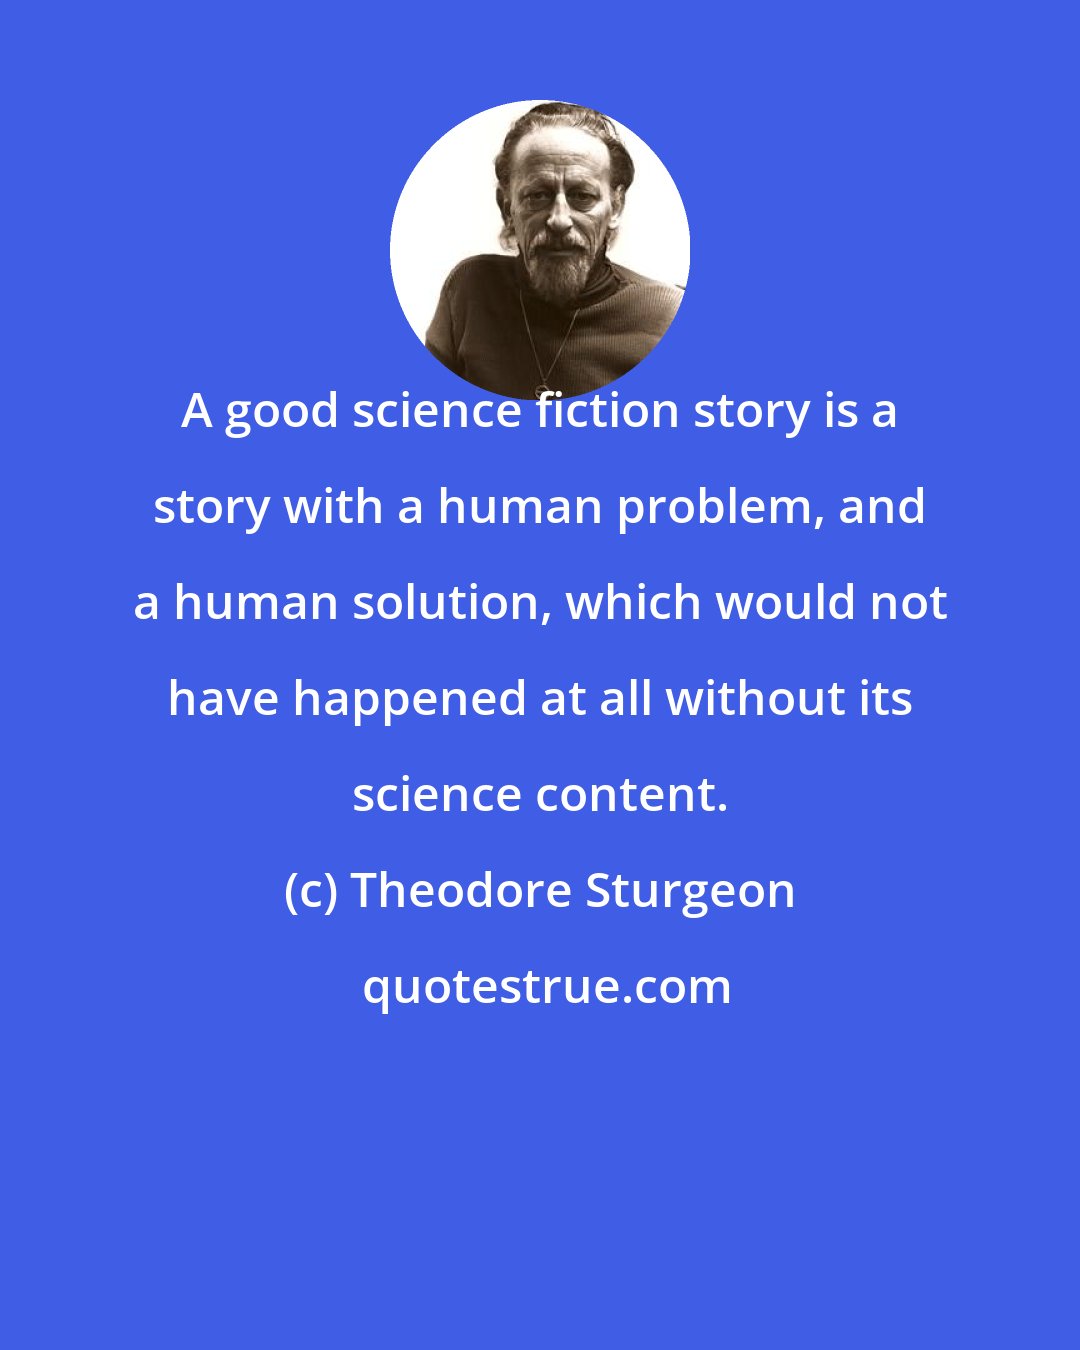 Theodore Sturgeon: A good science fiction story is a story with a human problem, and a human solution, which would not have happened at all without its science content.